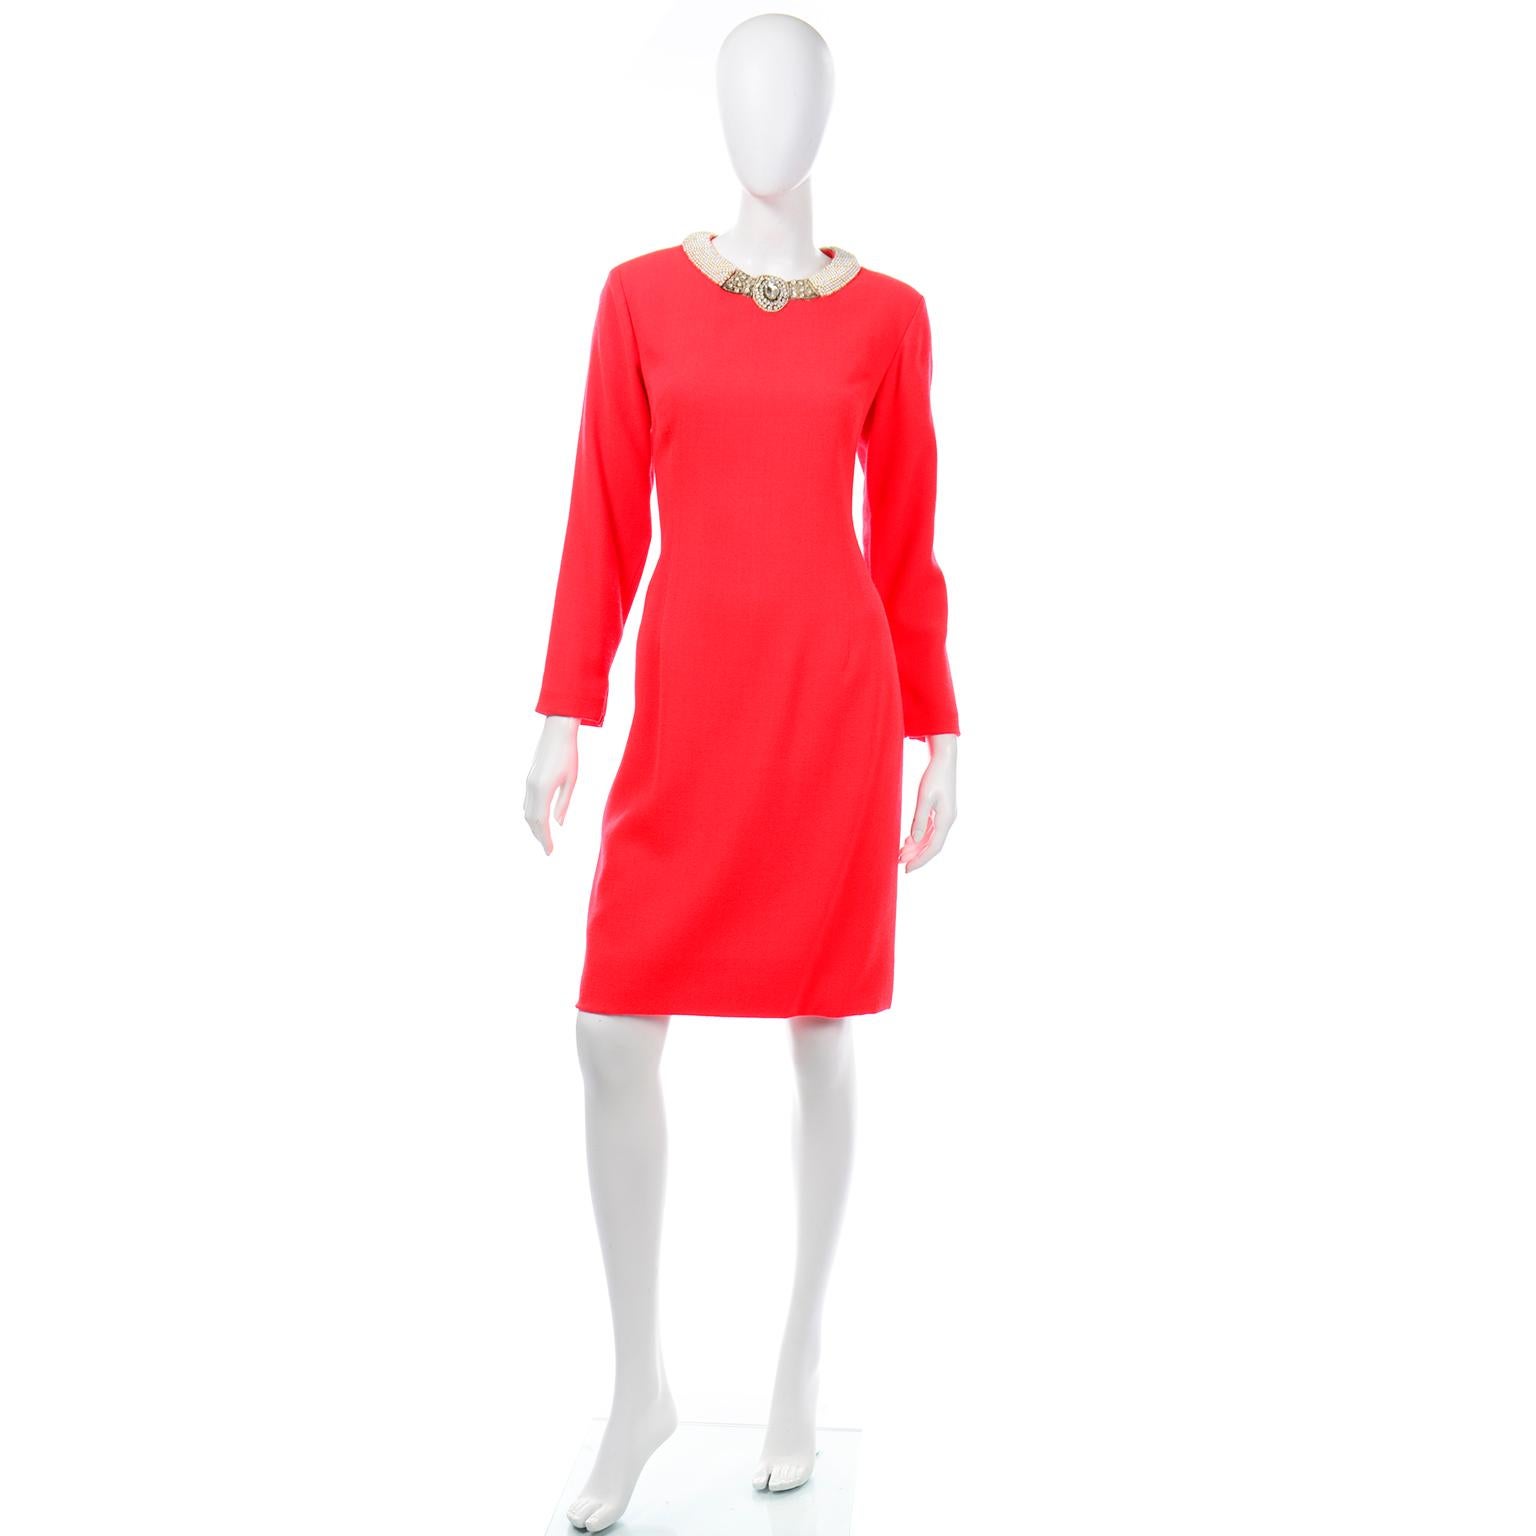 This is a really fun Travilla bright red wool crepe dress made for Saks Fifth Avenue. We especially love the jeweled collar with gold beads, faux pearls, crystal beads, rhinestones, and metallic thread embroidery. The long sleeve dress has metal